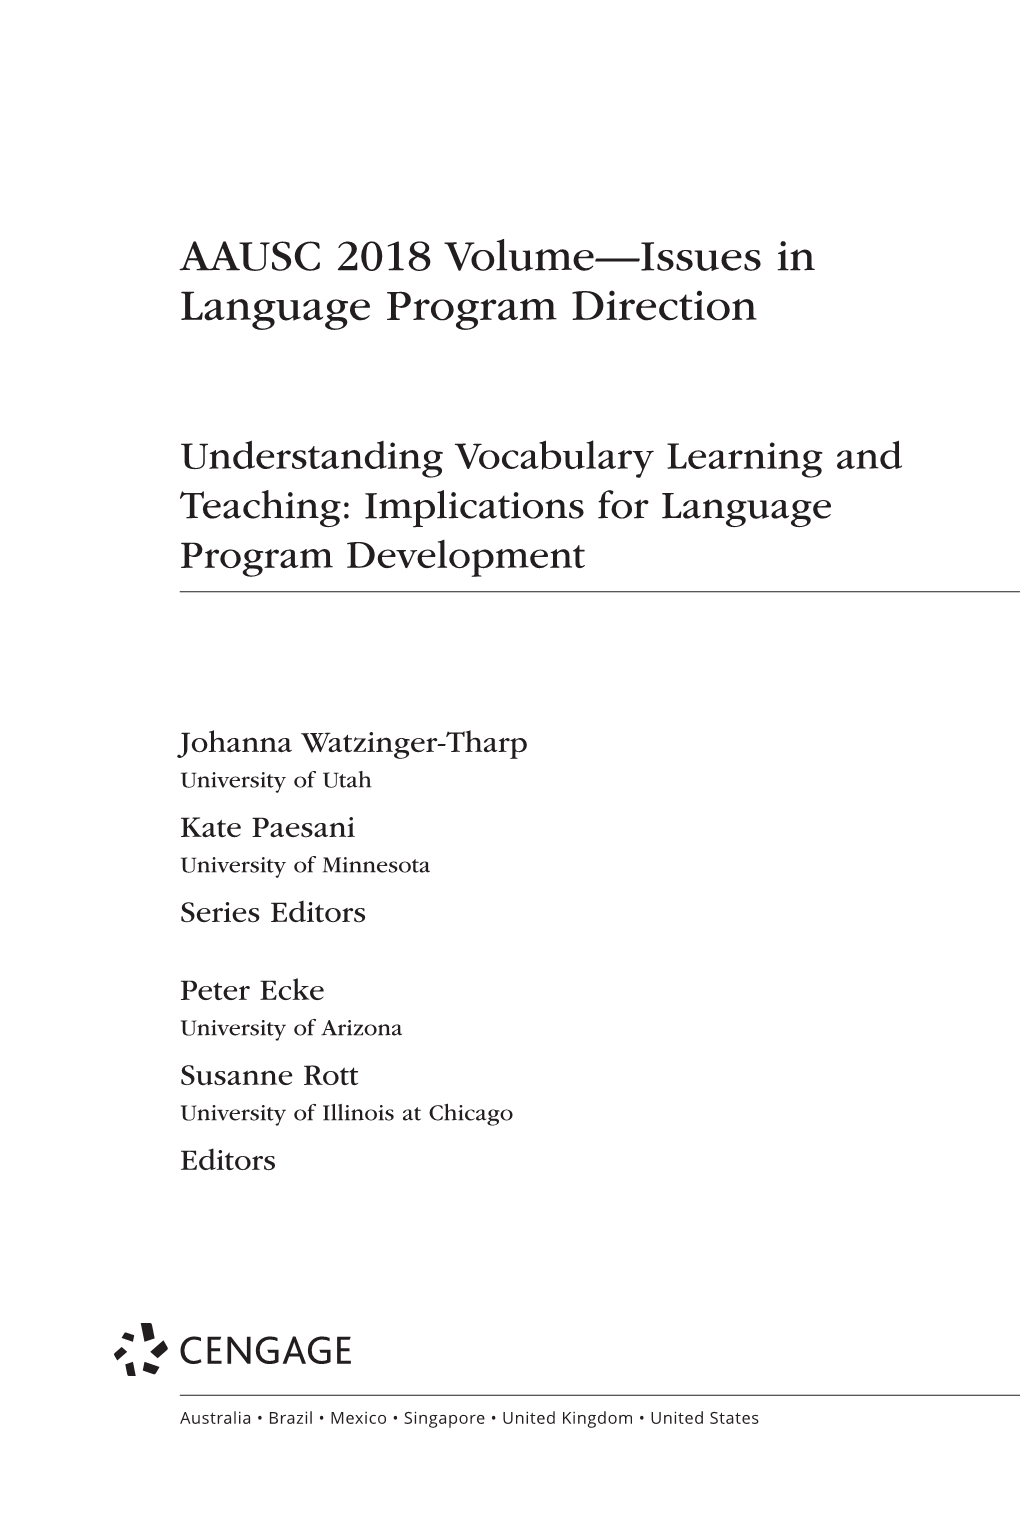 Vocabulary Coverage and Lexical Characterisitics in L2 Spanish Textbooks